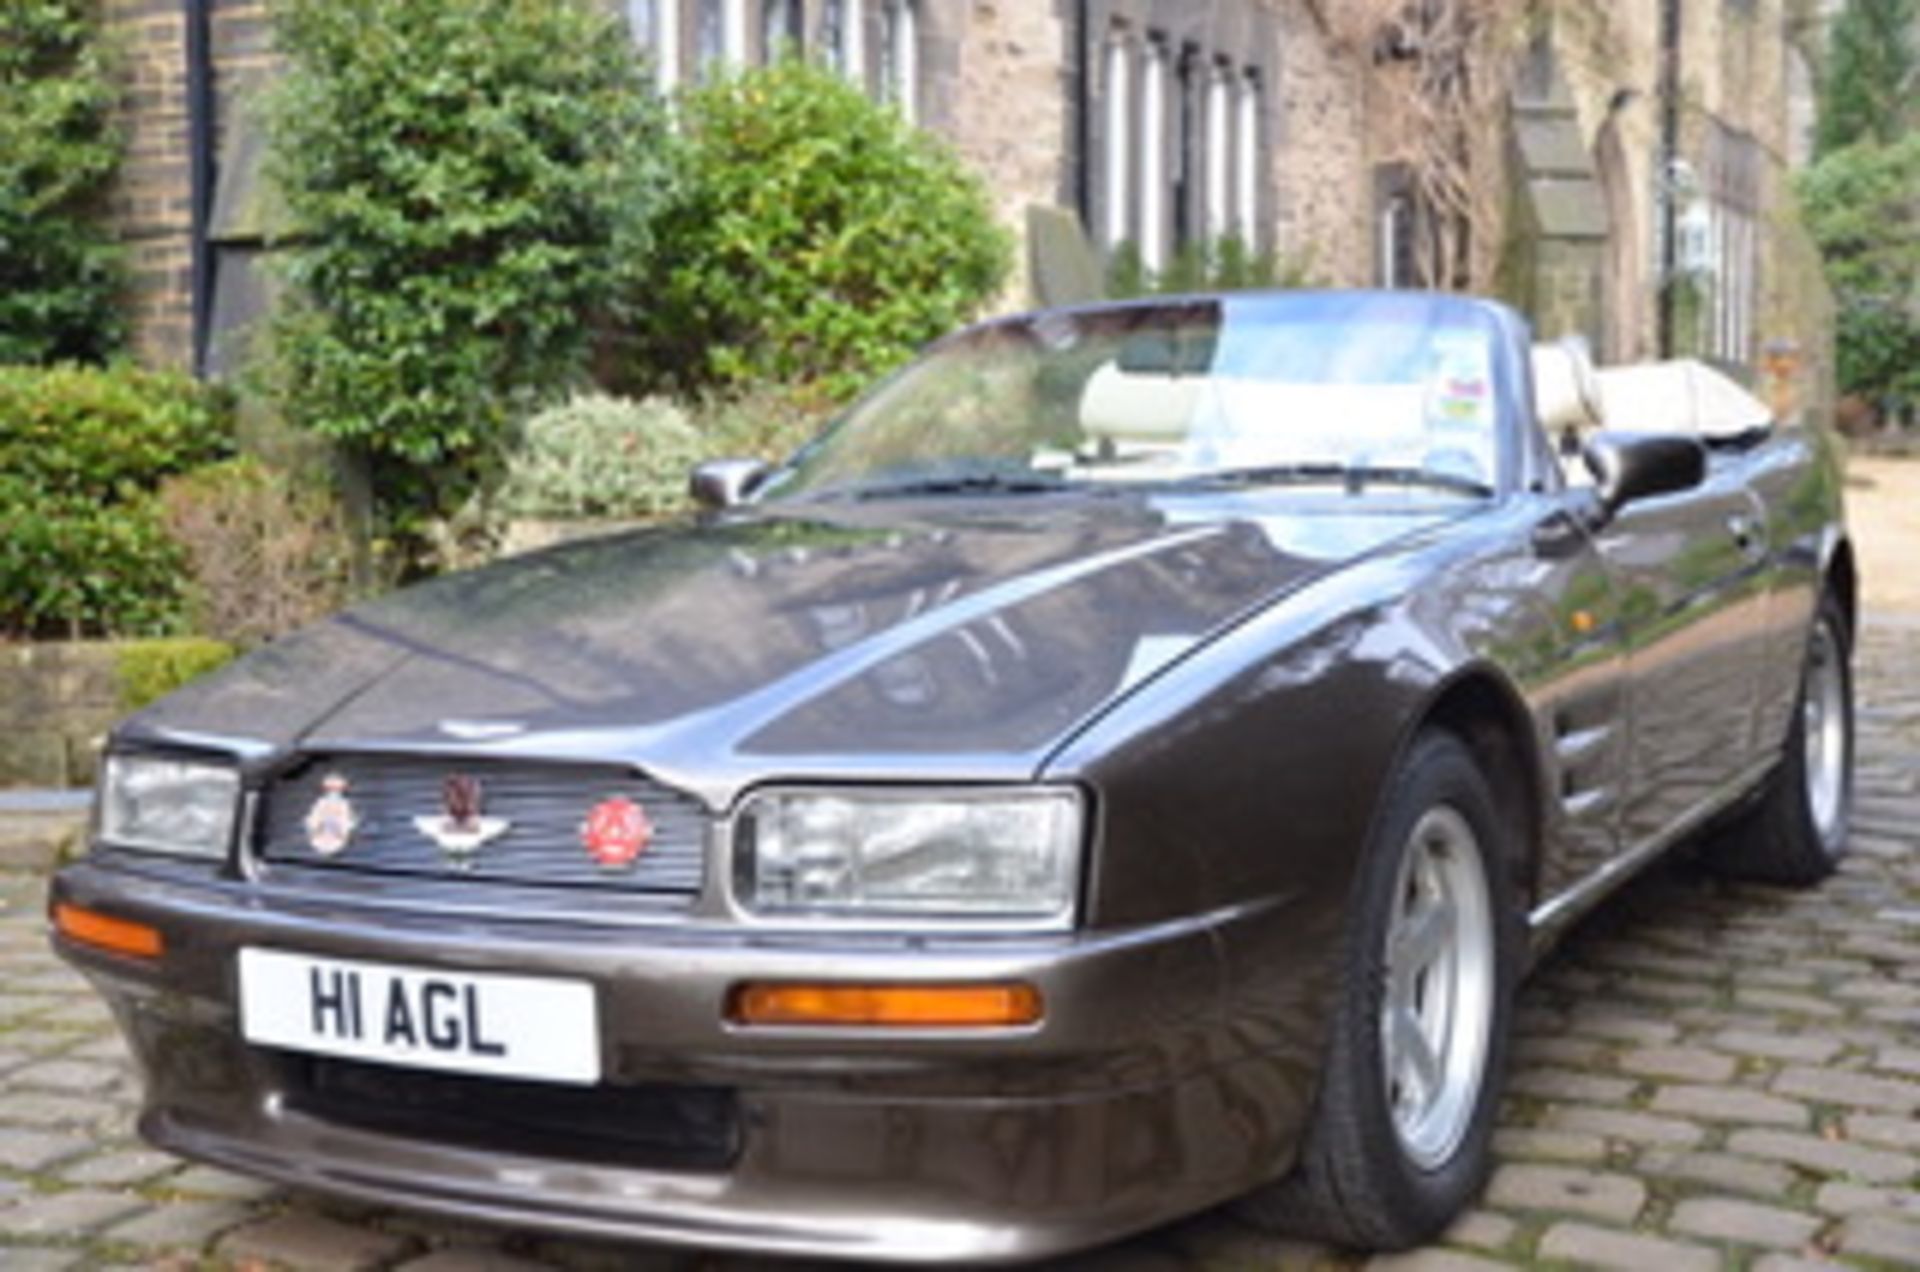 1993 Aston Martin Virage Volante - Having 11 months MOT and aviators number plate H1 AGL - Image 10 of 48